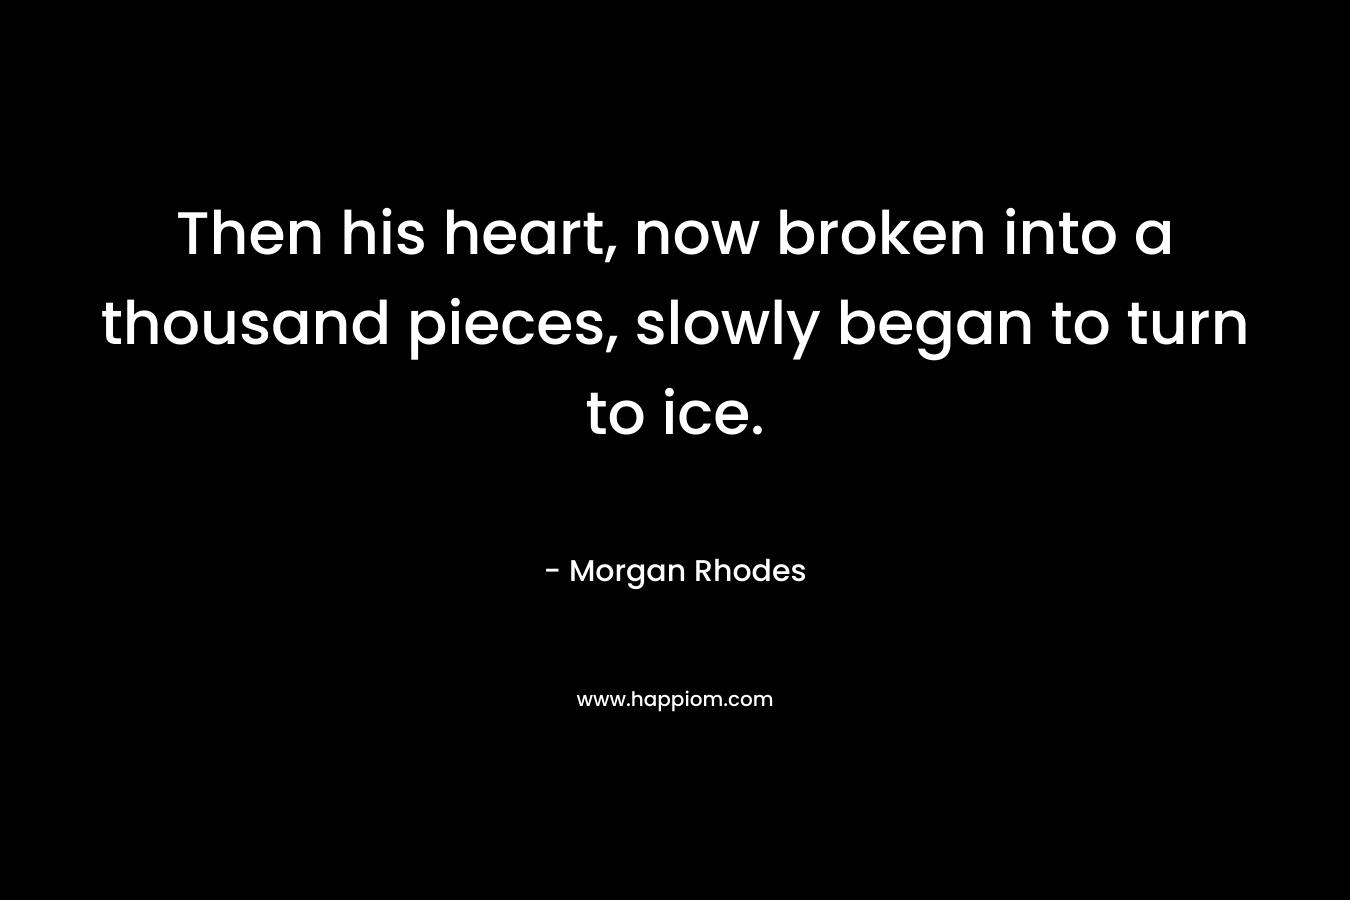 Then his heart, now broken into a thousand pieces, slowly began to turn to ice. – Morgan Rhodes